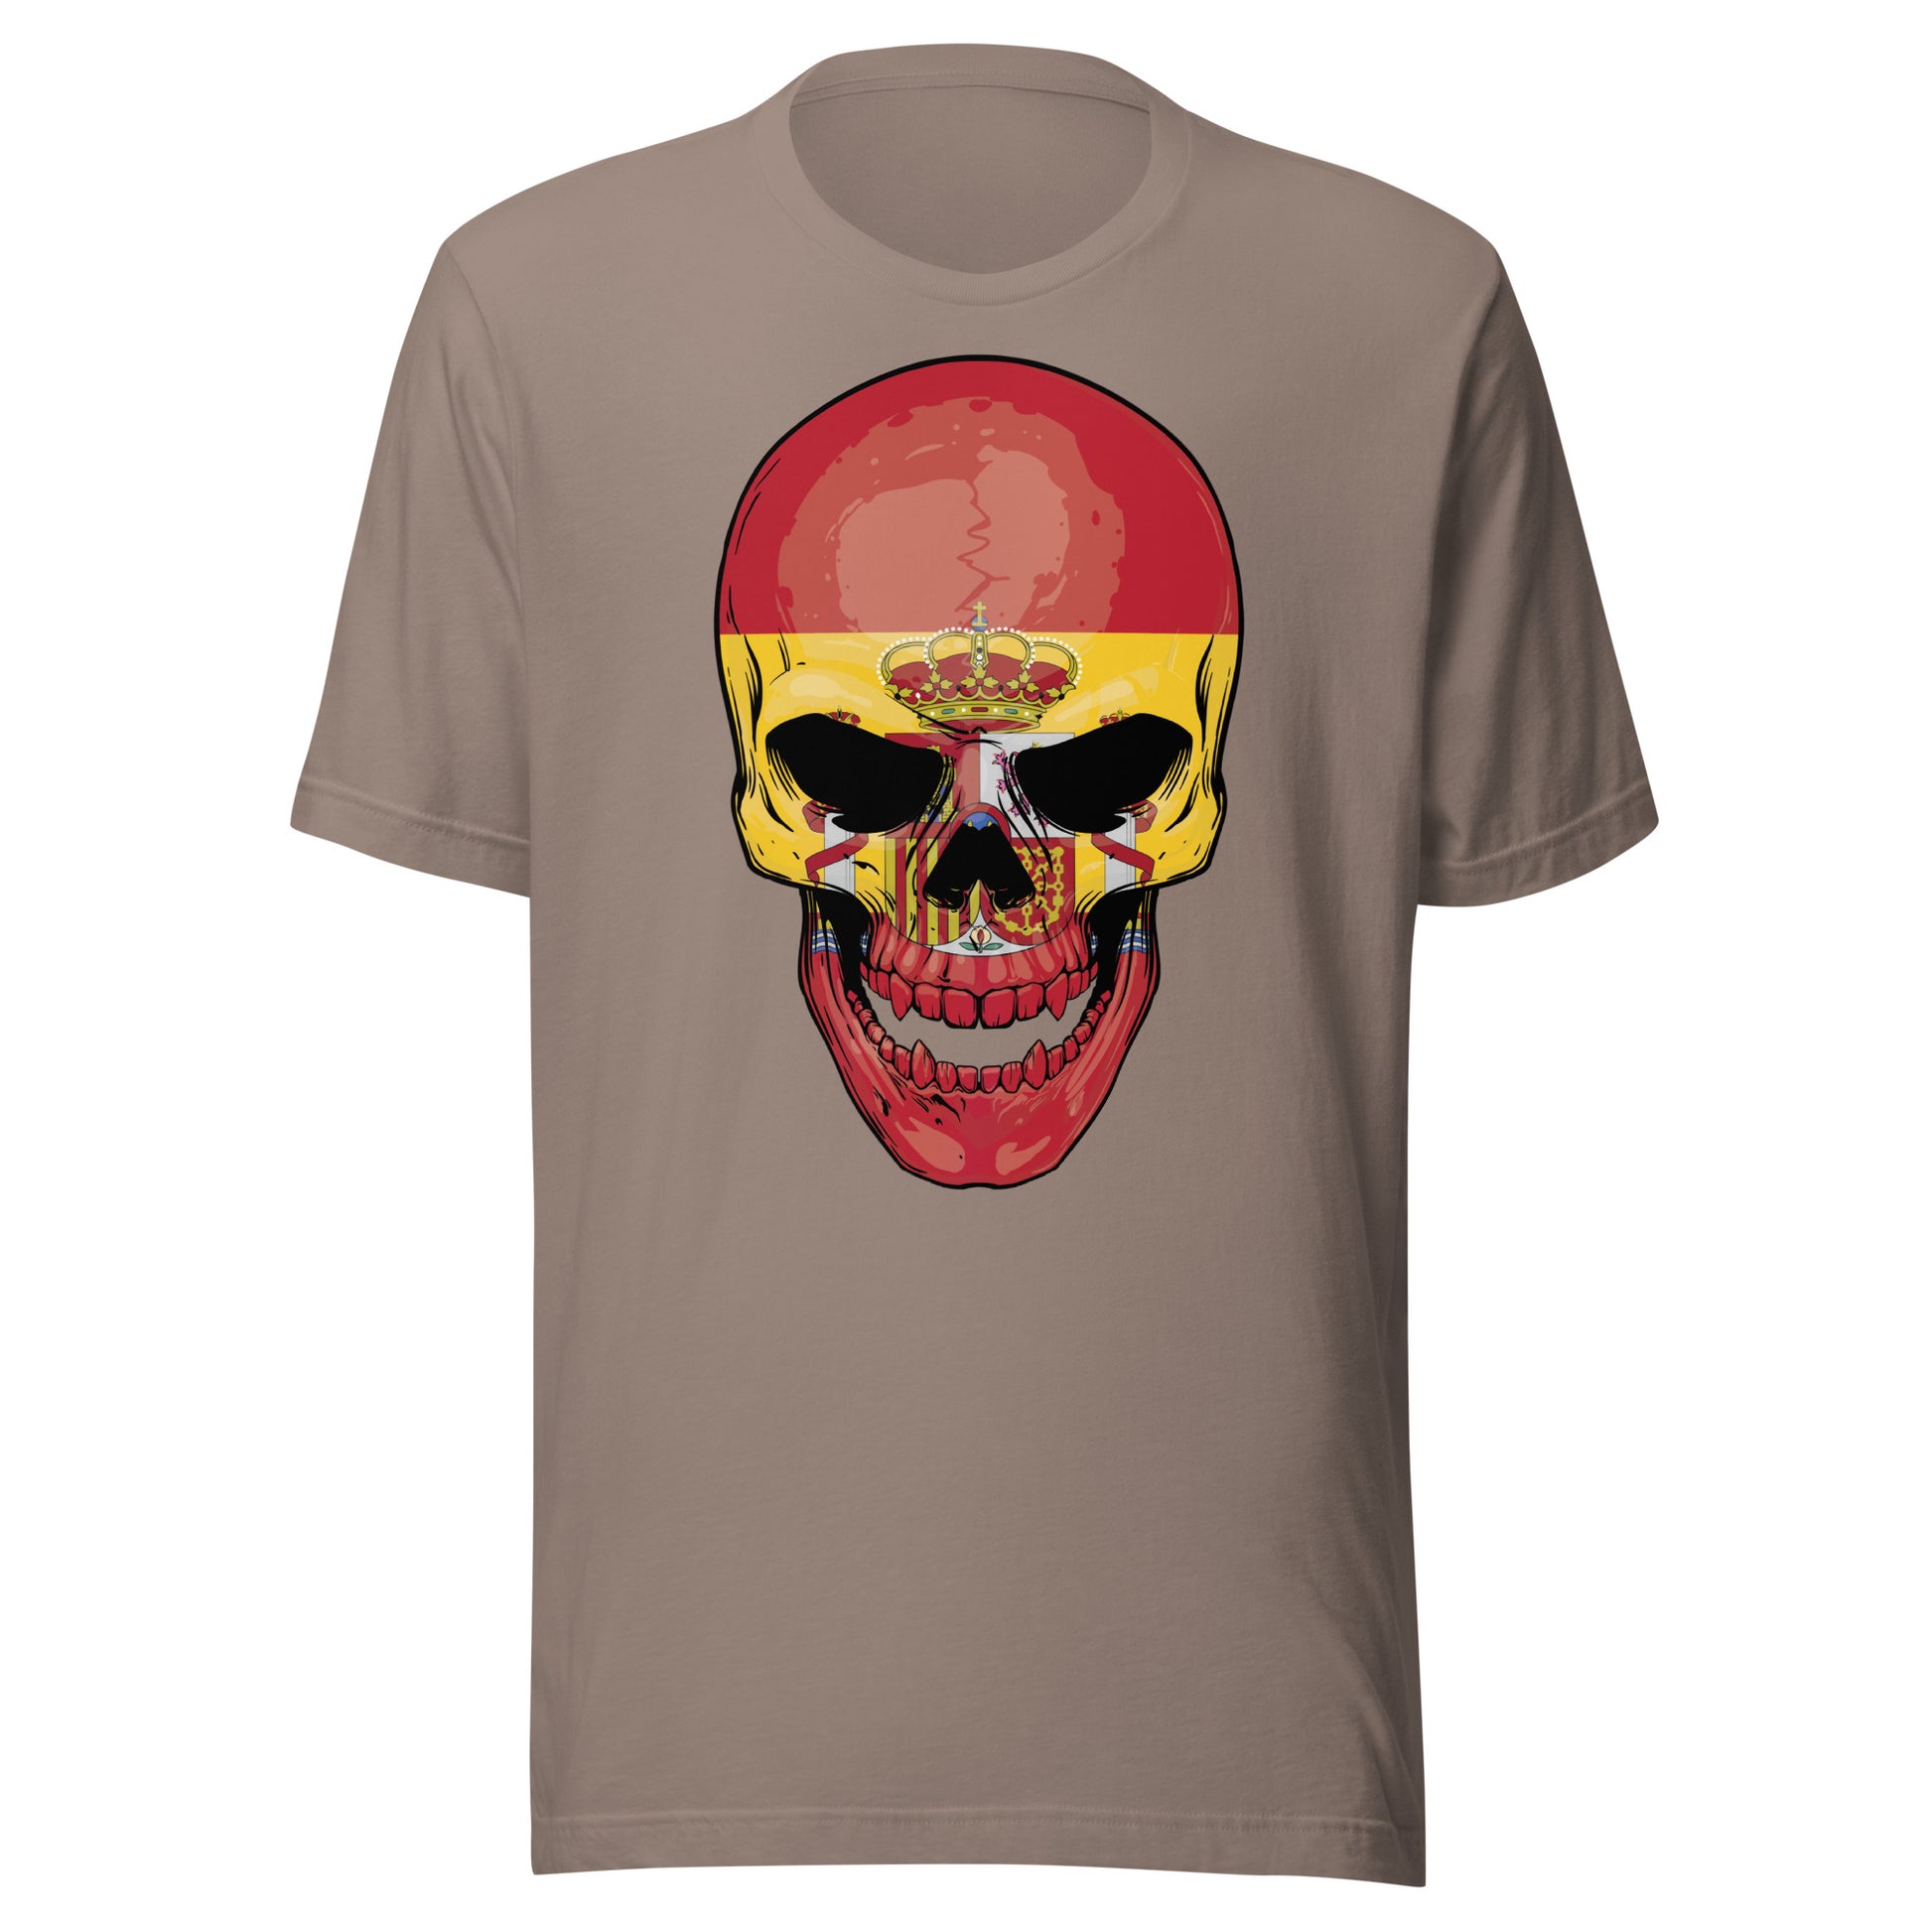 Celebrate Spanish Culture With This Skull T-Shirt